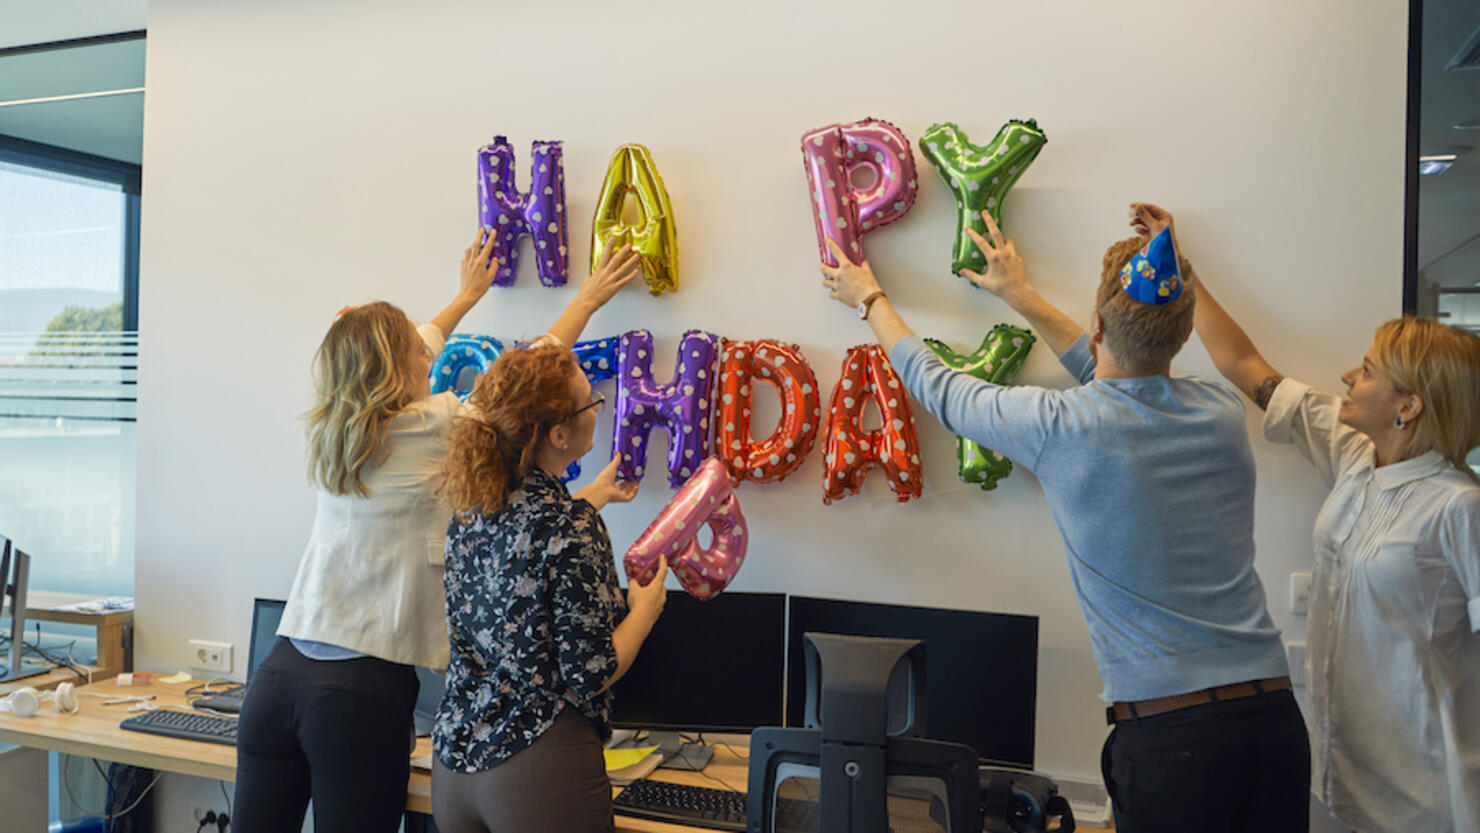 Colleagues decorating office with happy birthday writing